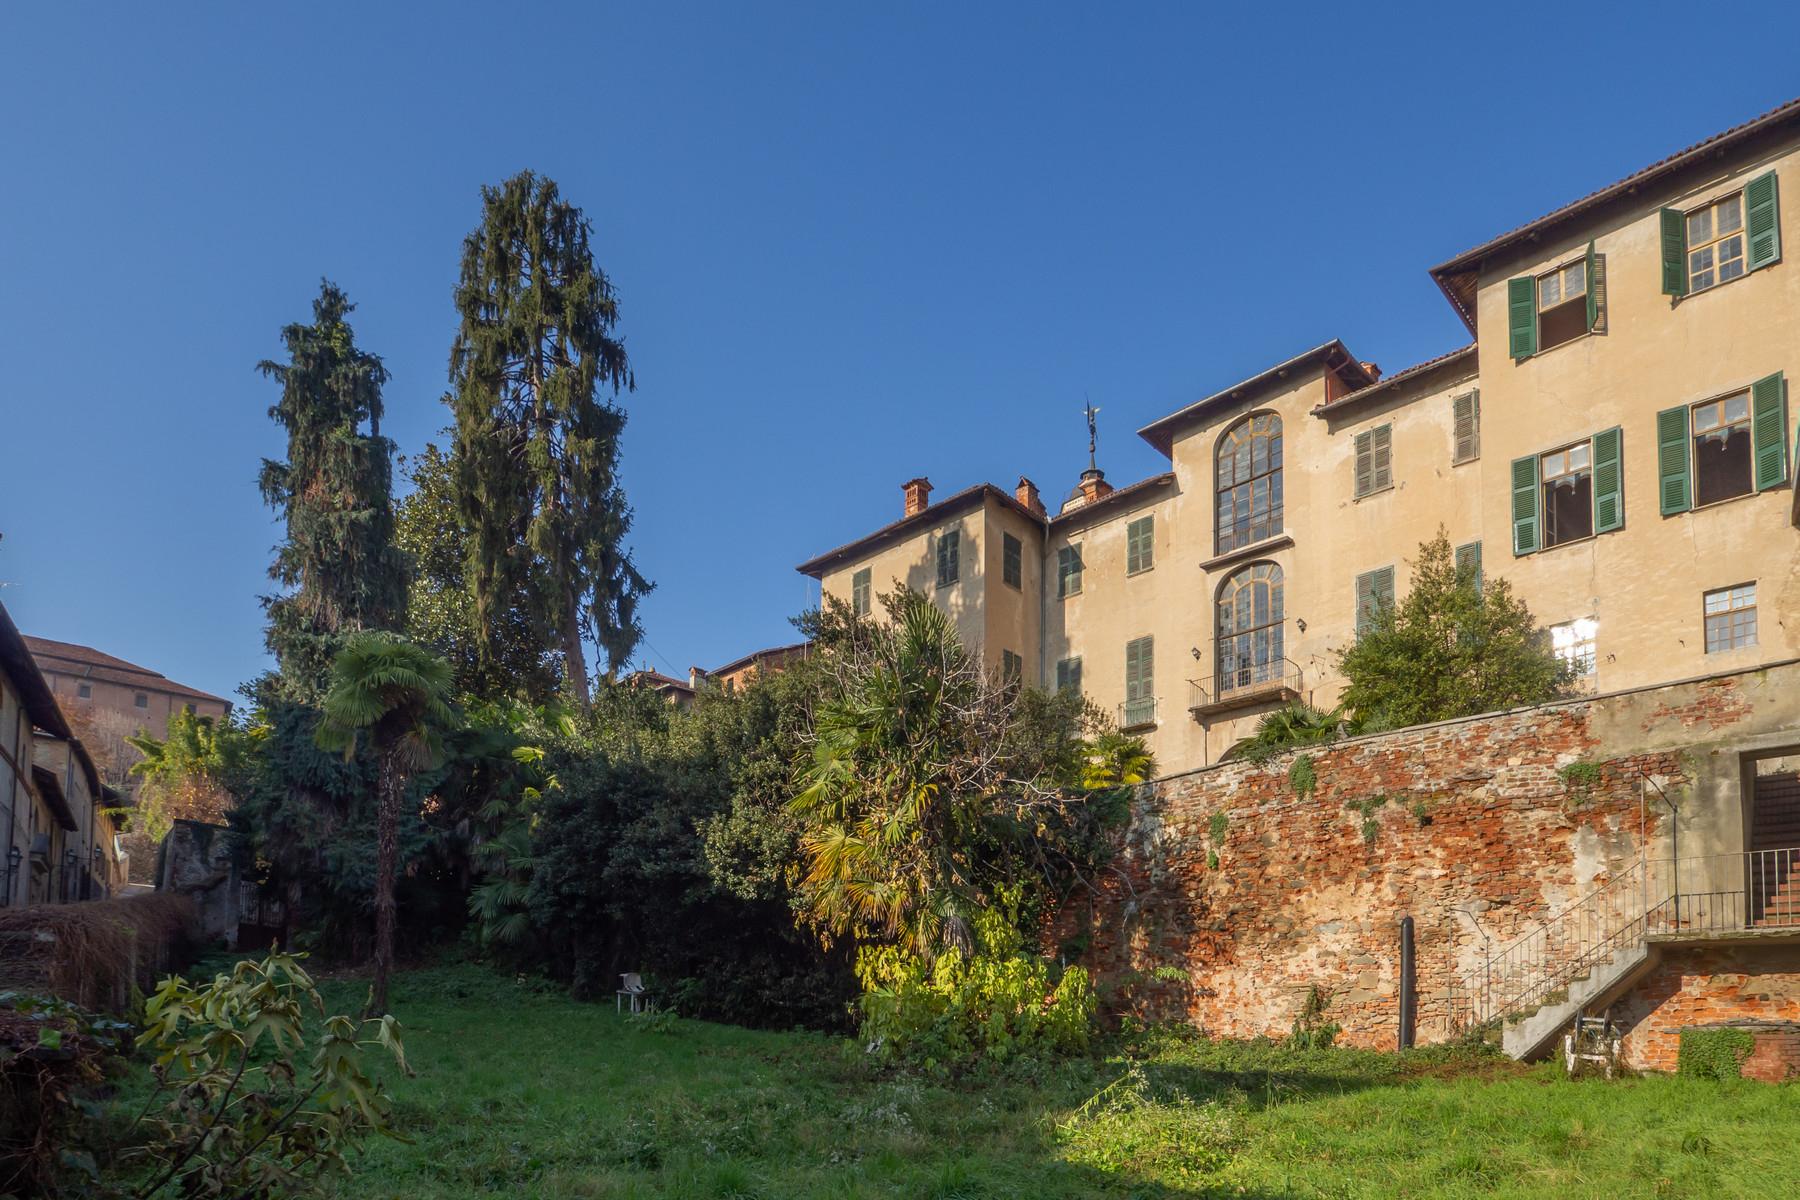 Historical manor in the center of Saluzzo - 17